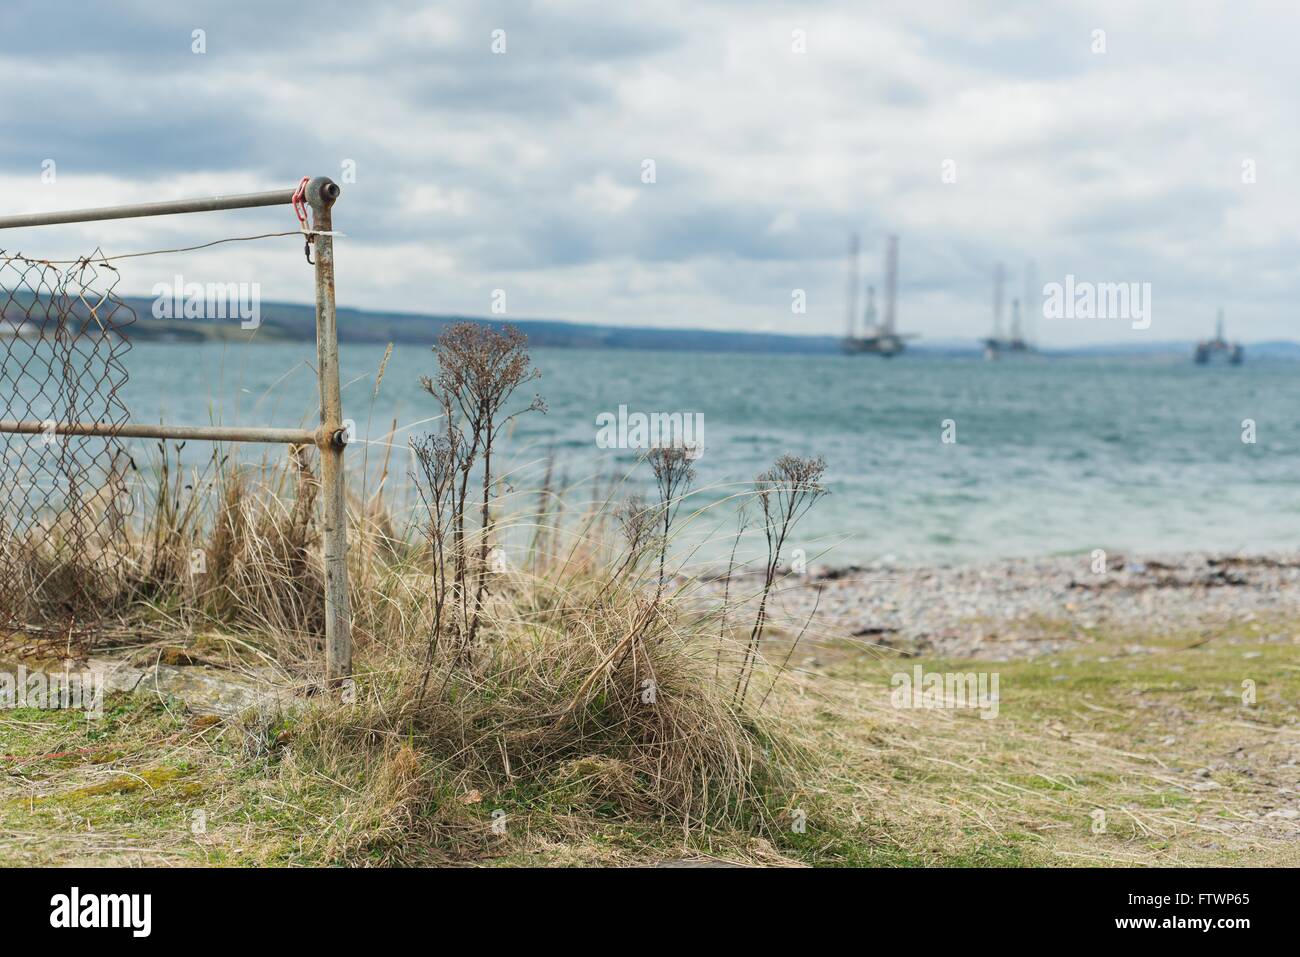 Cromarty Firth, oil rigs in distance out of focus Stock Photo